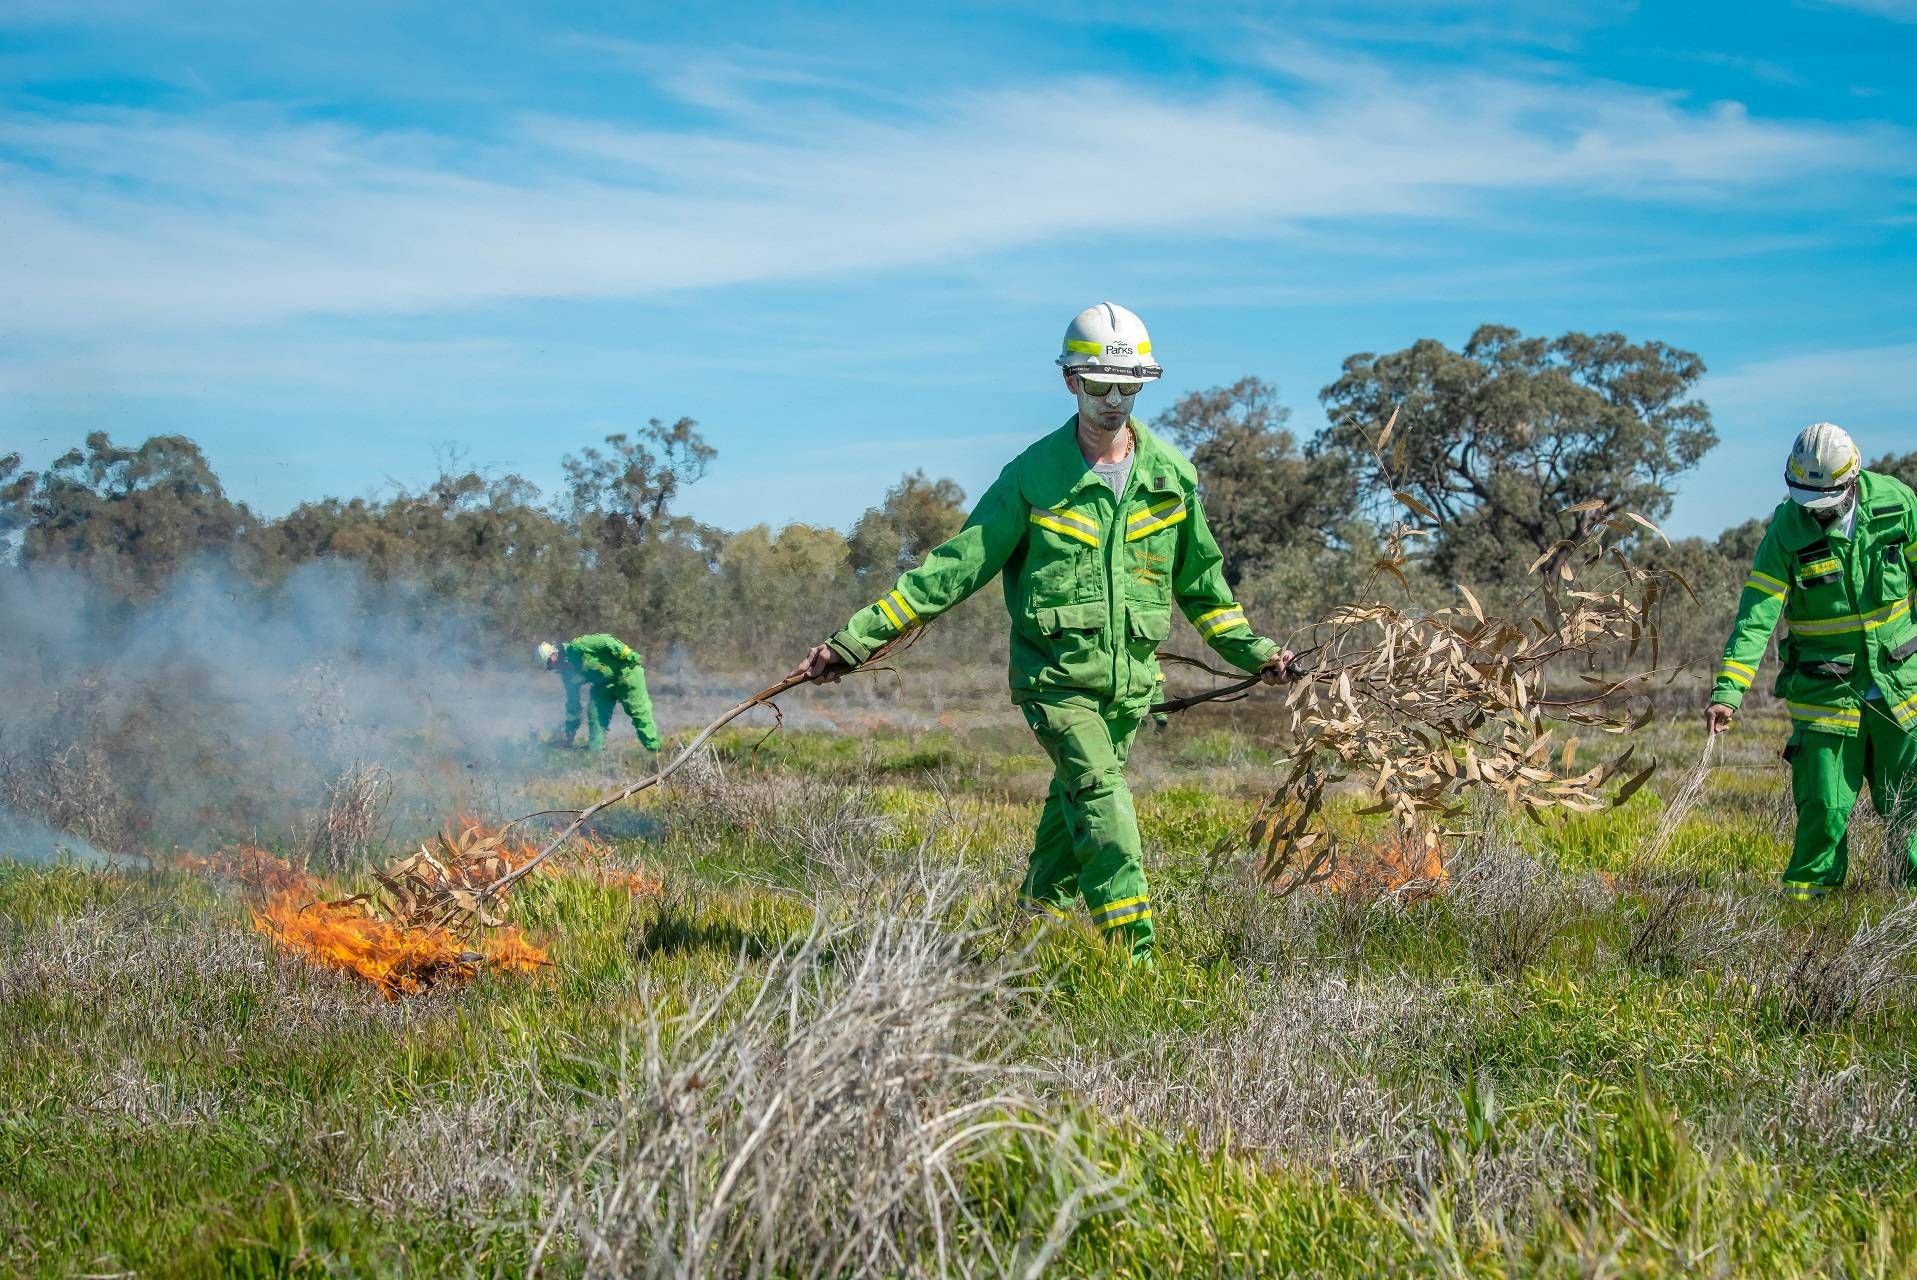 Man dressed in green overalls and wearing hard hat is igniting grasses using a branch that is on fire.